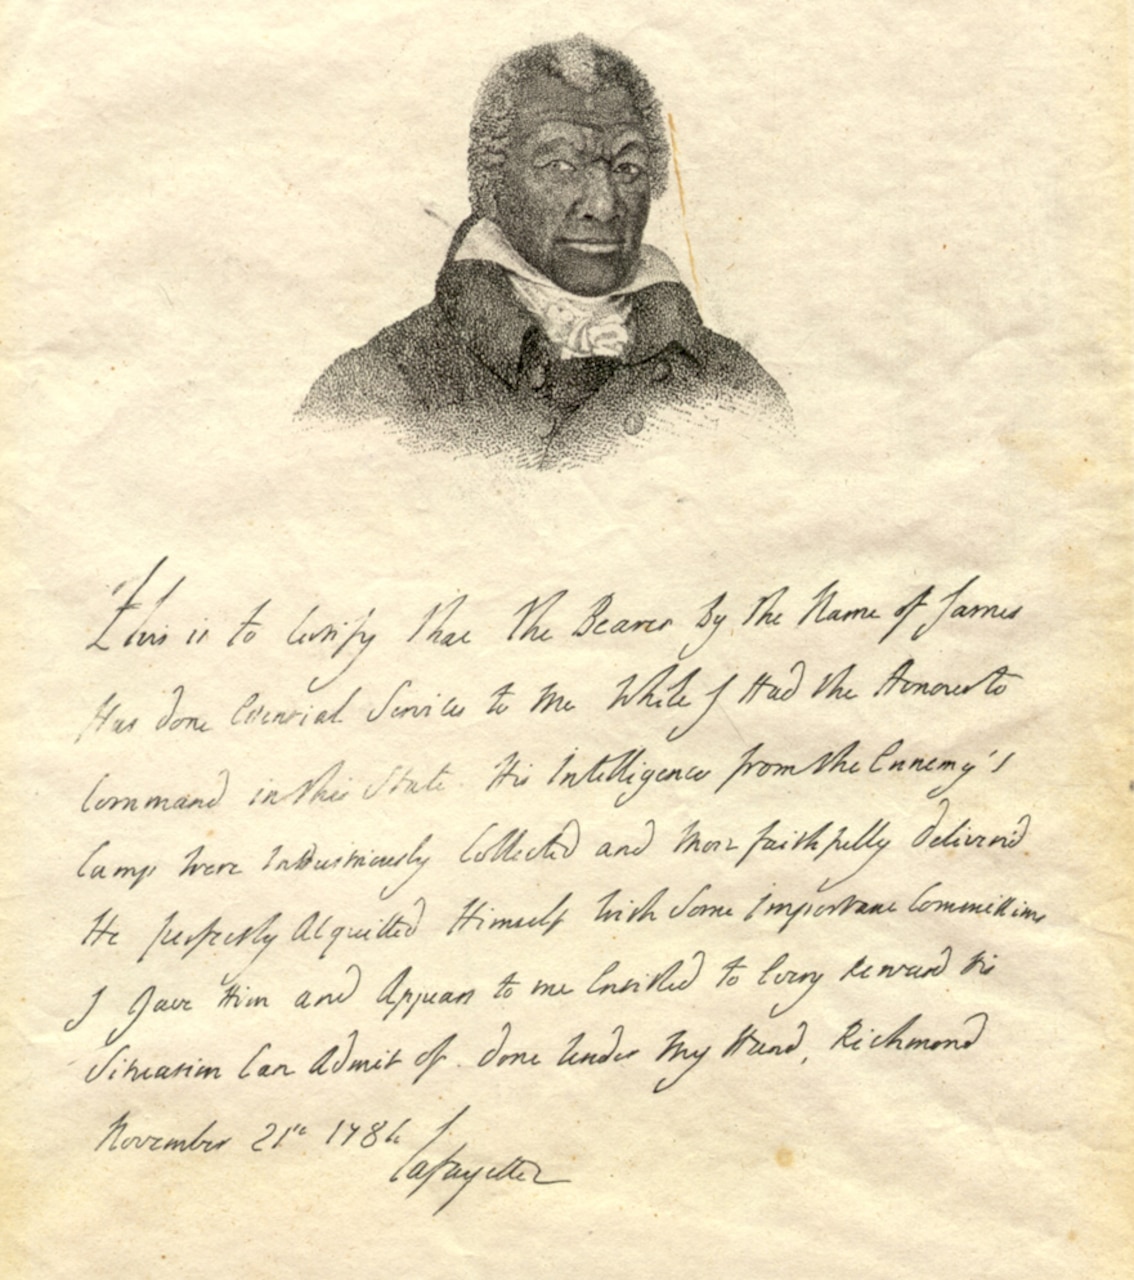 Facsimile of the Marquis de Lafayette's original certificate commending James Armistead Lafayette's service on behalf of the Continental Army during the American Revolutionary War, dated Nov. 21, 1784. He served as a double agent, and provided the Continental Army invaluable intelligence throughout the war. Schomburg Center for Research in Black Culture Manuscripts, Archives and Rare Books Division